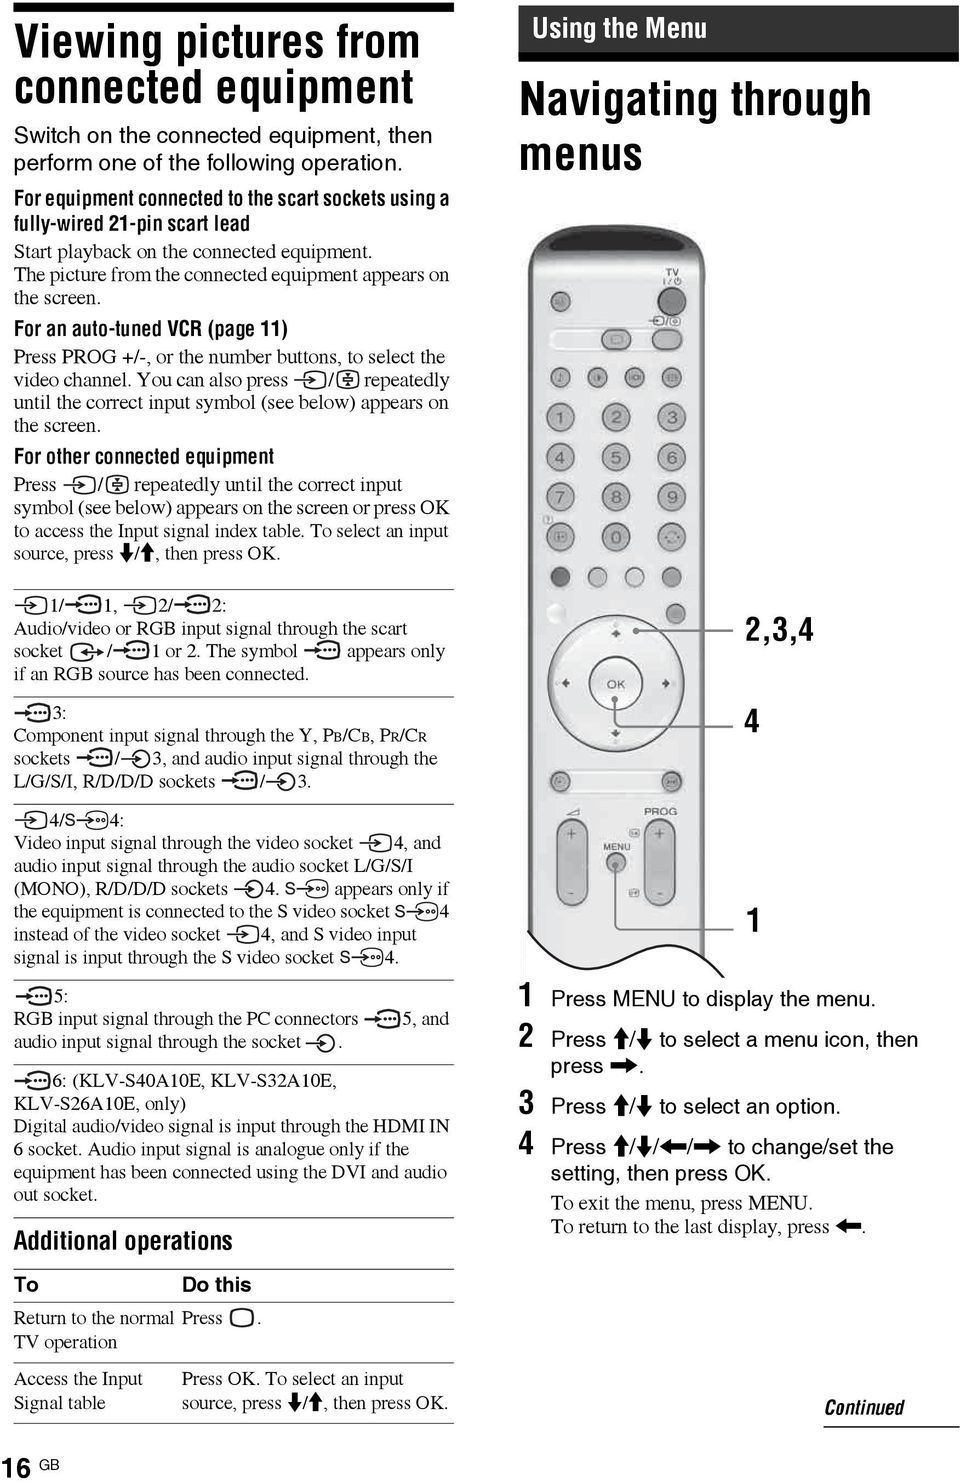 For an auto-tuned VCR (page 11) Press PROG +/-, or the number buttons, to select the video channel. You can also press / repeatedly until the correct input symbol (see below) appears on the screen.